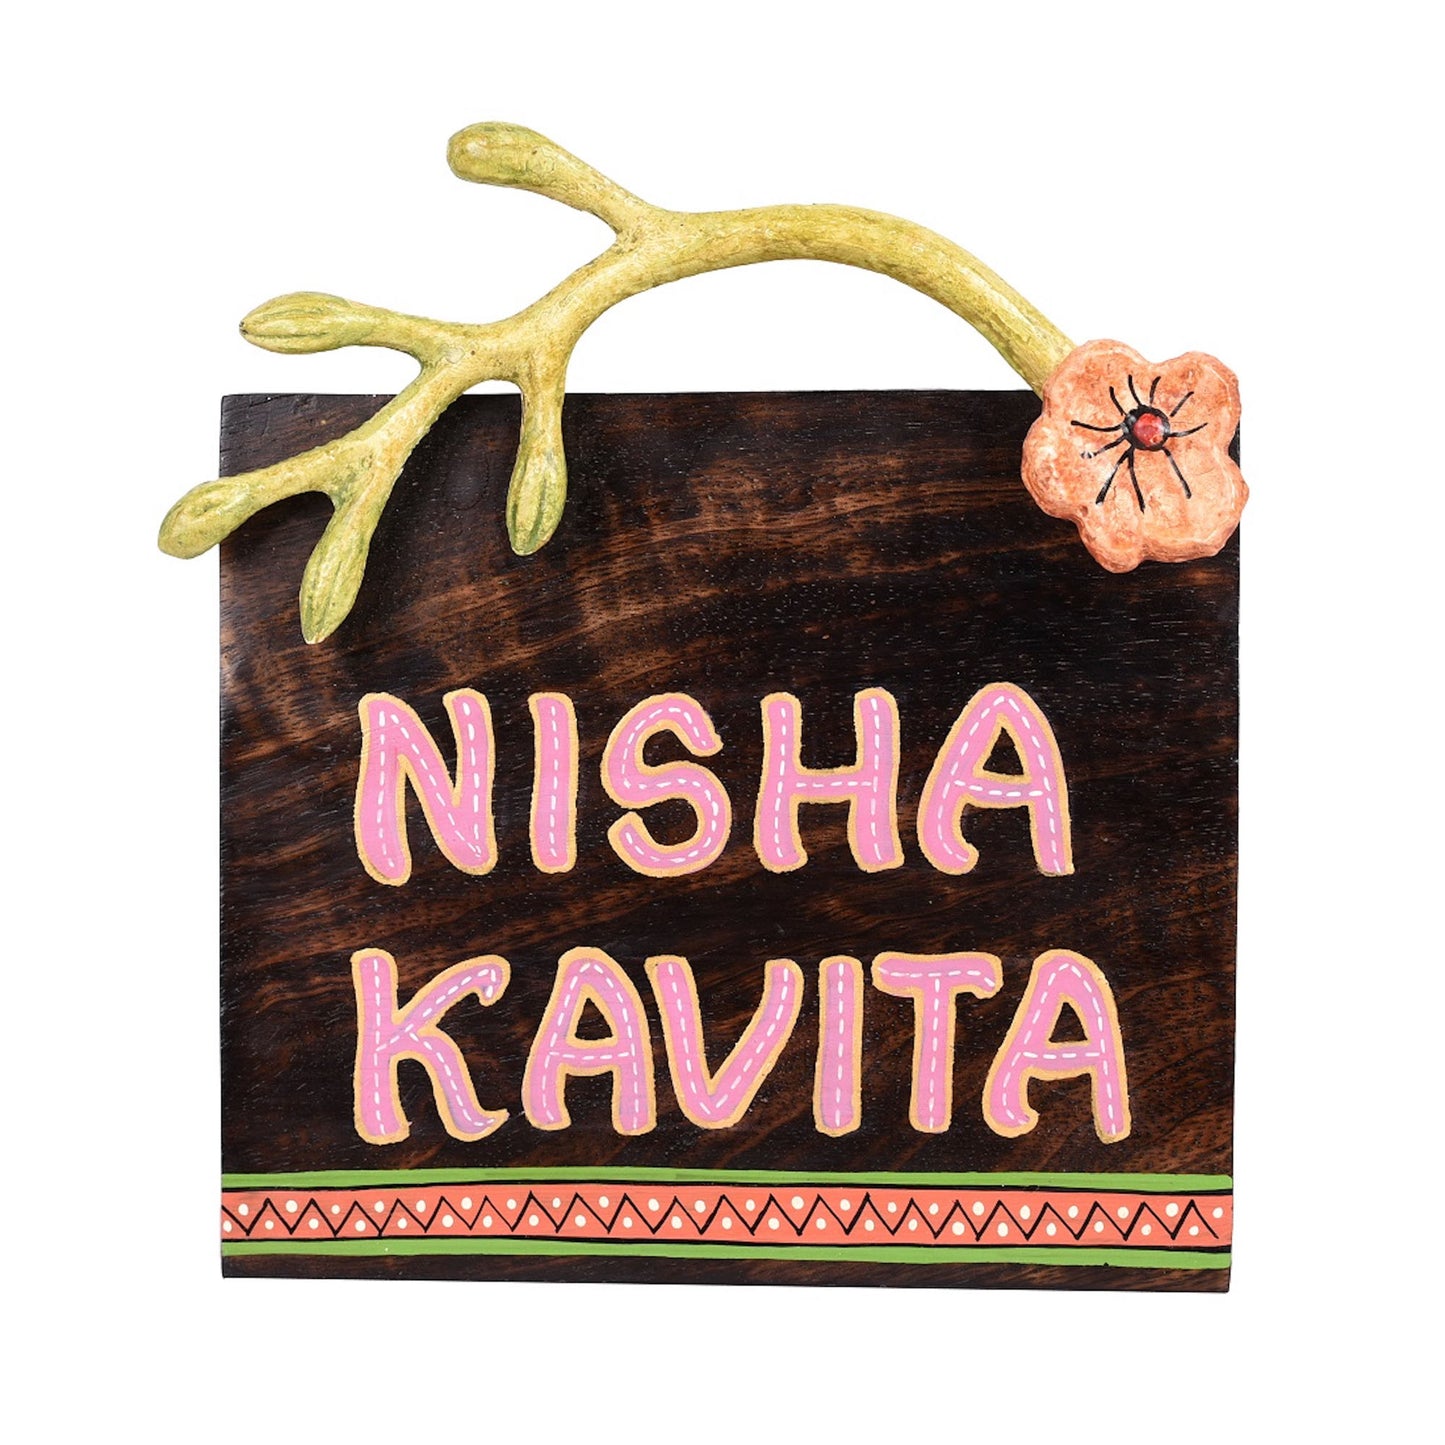 Wooden Nameplate